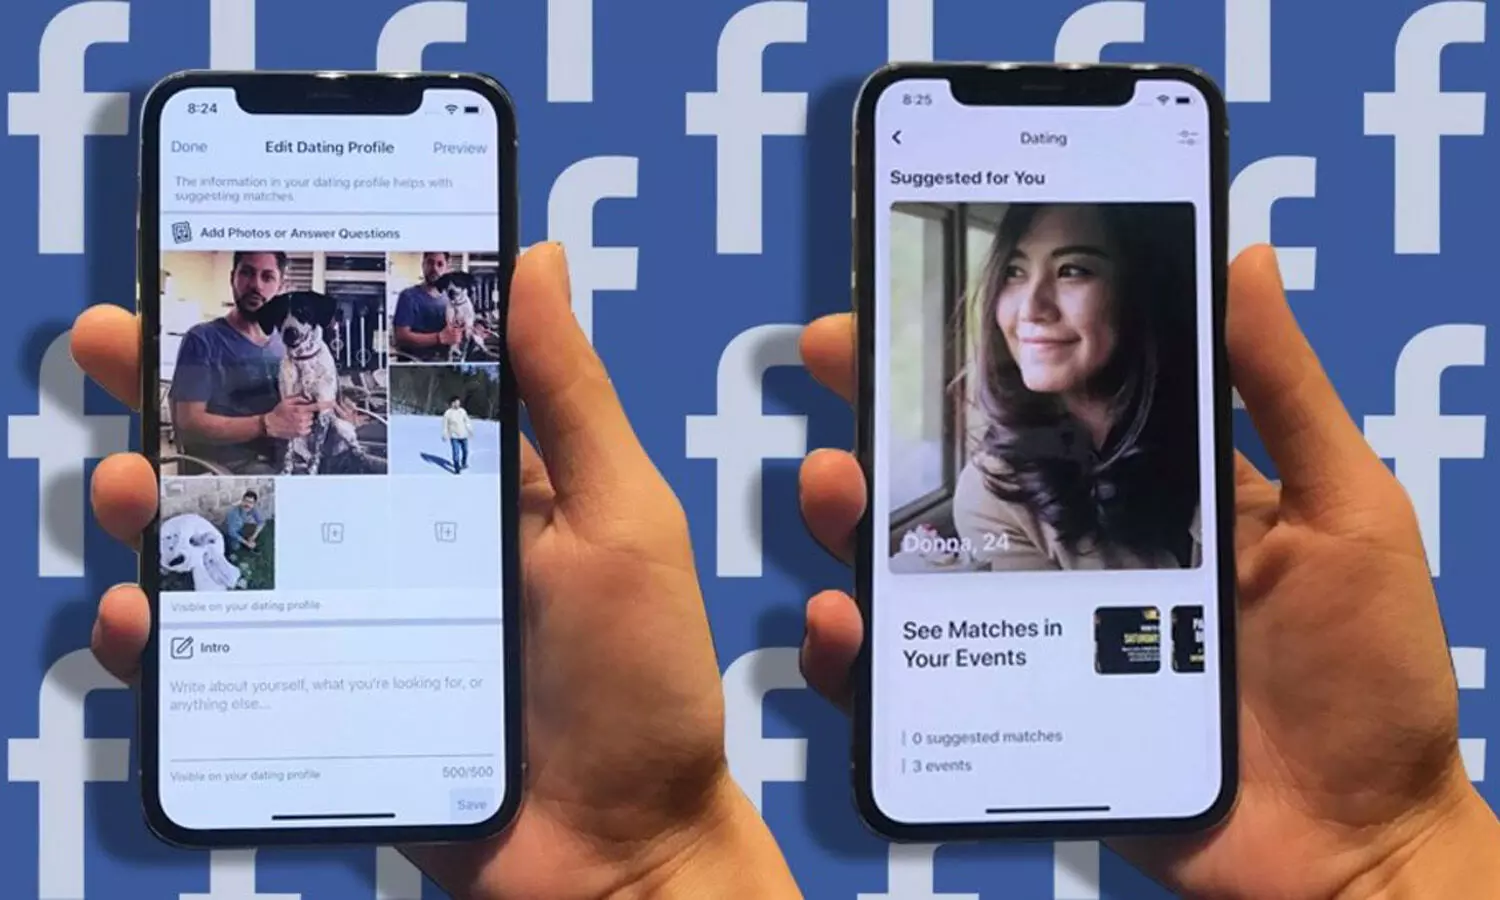 Facebook all set to launch new video speed dating app Sparked